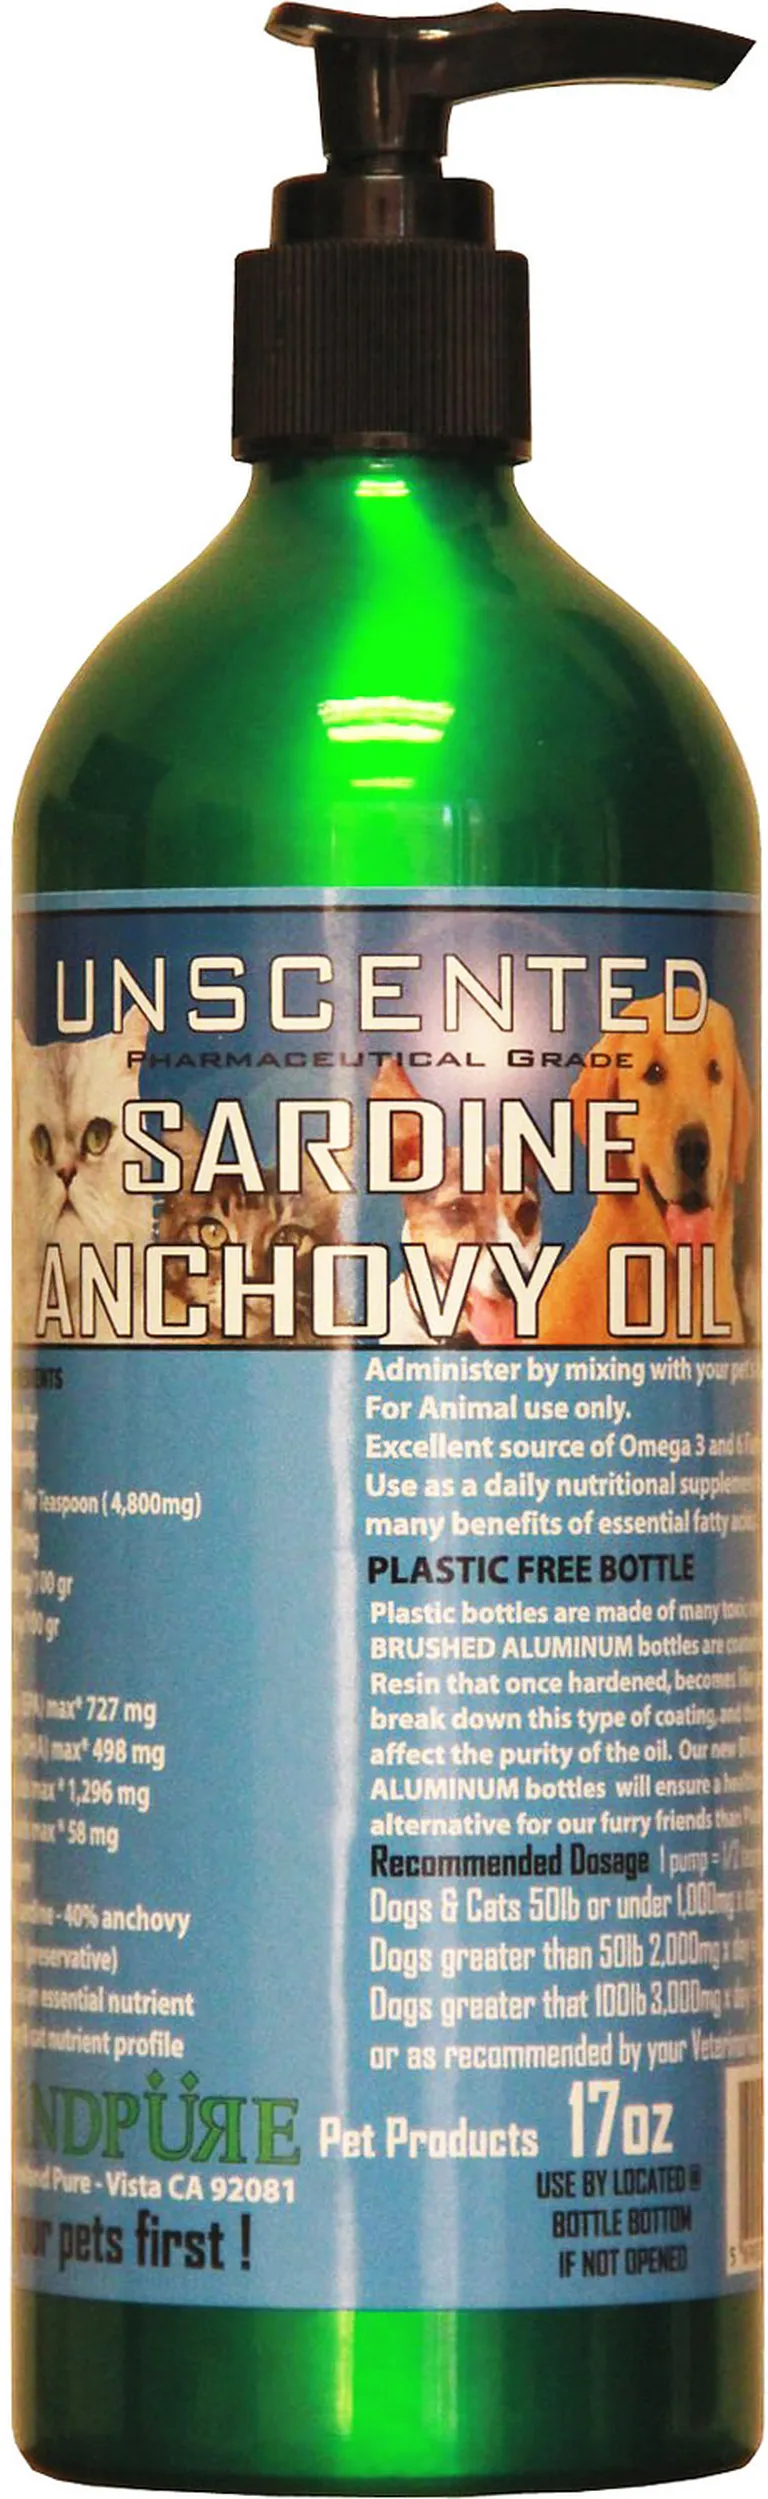 Iceland Pure Sardine Anchovy Oil Photo 1